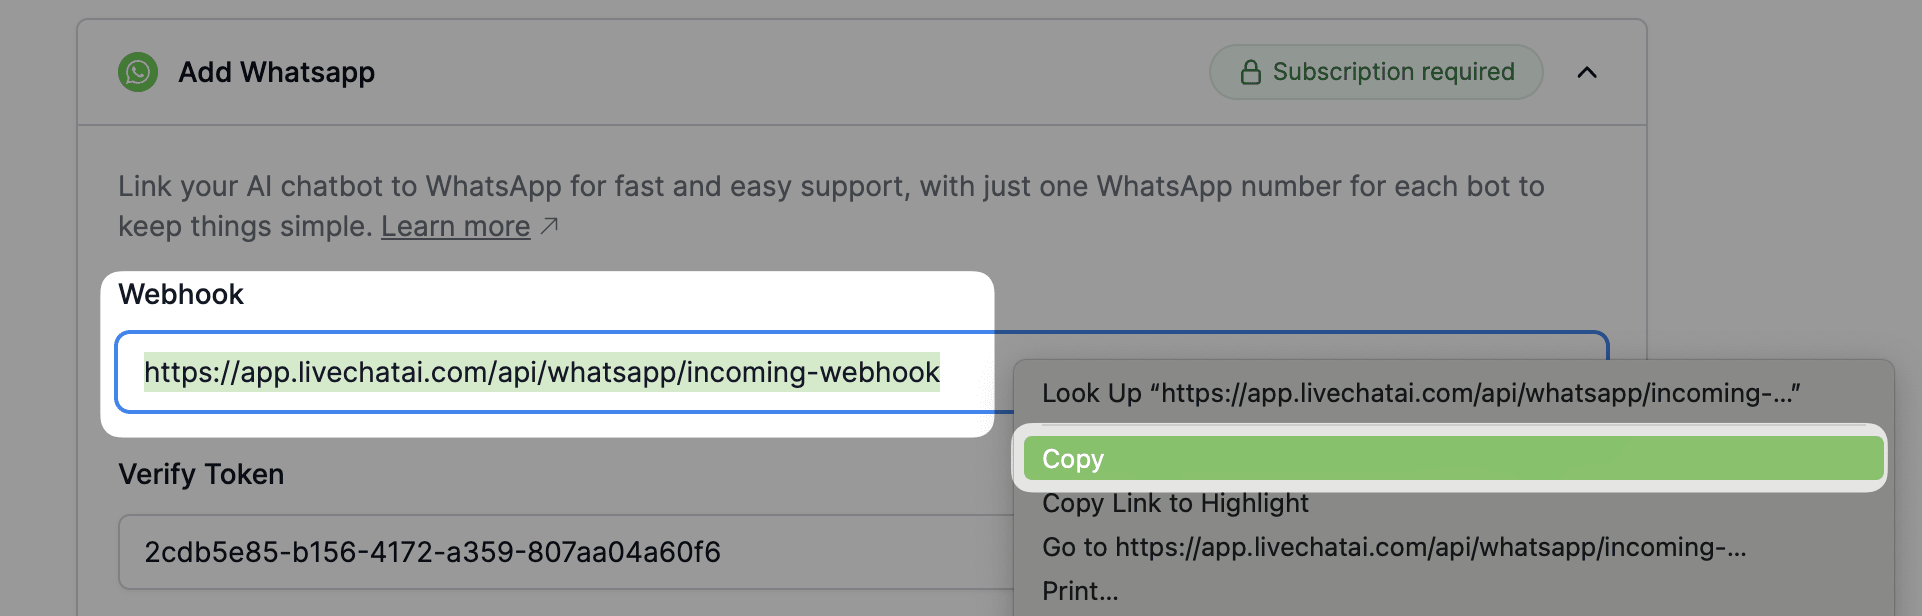 Copying Webhook URL from WhatsApp integration section in LiveChatAI